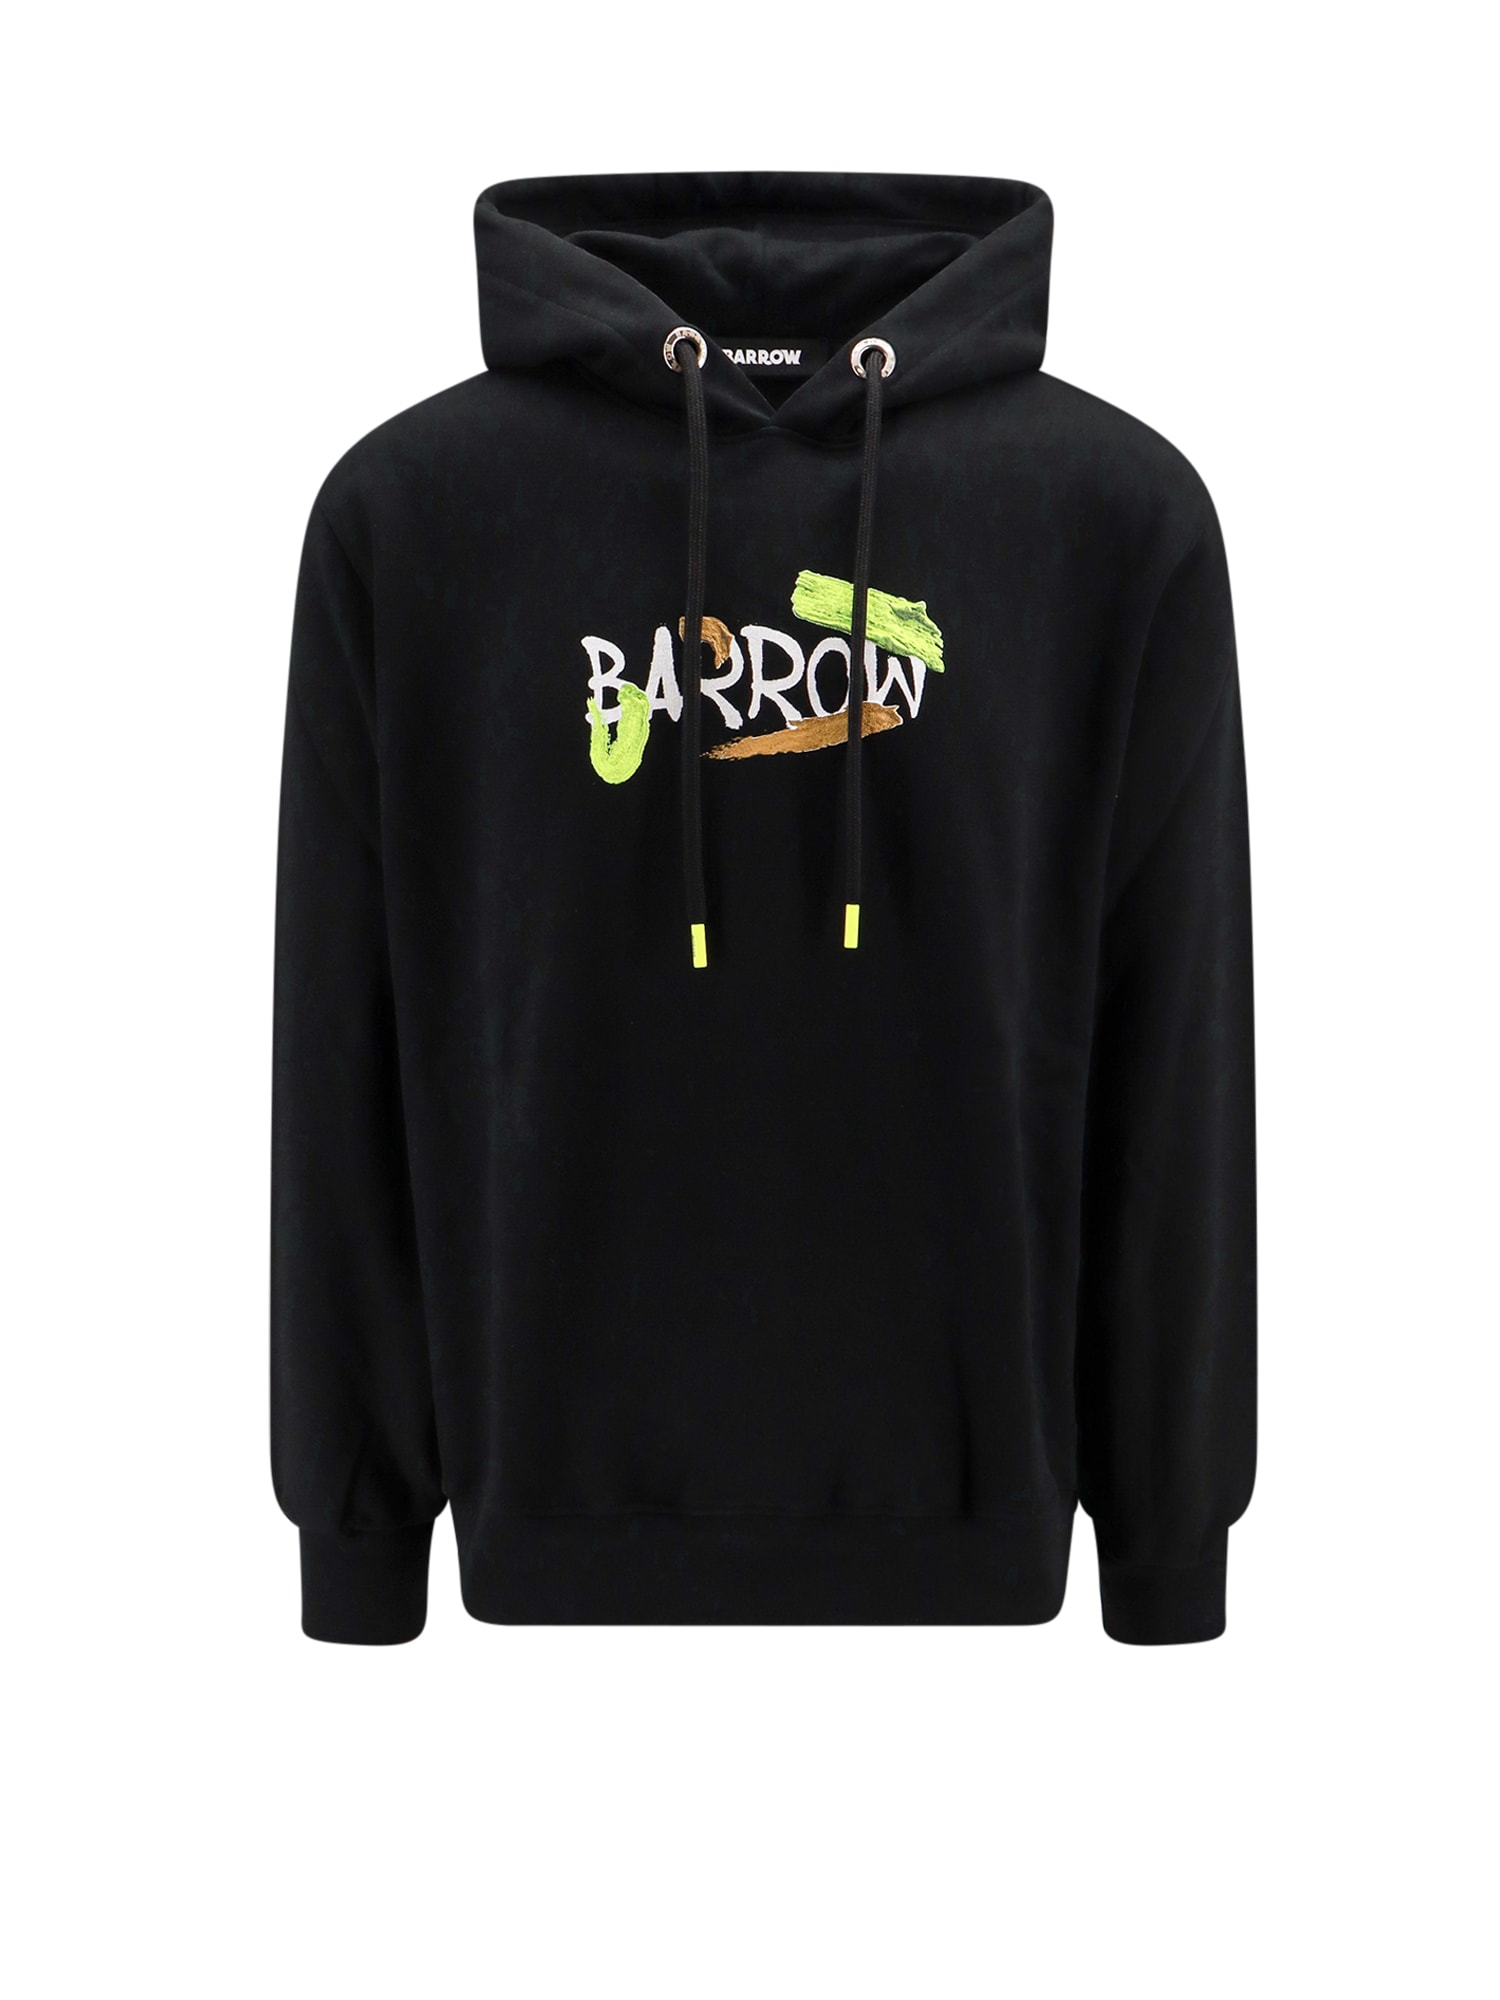 Black Hoodie With Lettering And Graphic Print